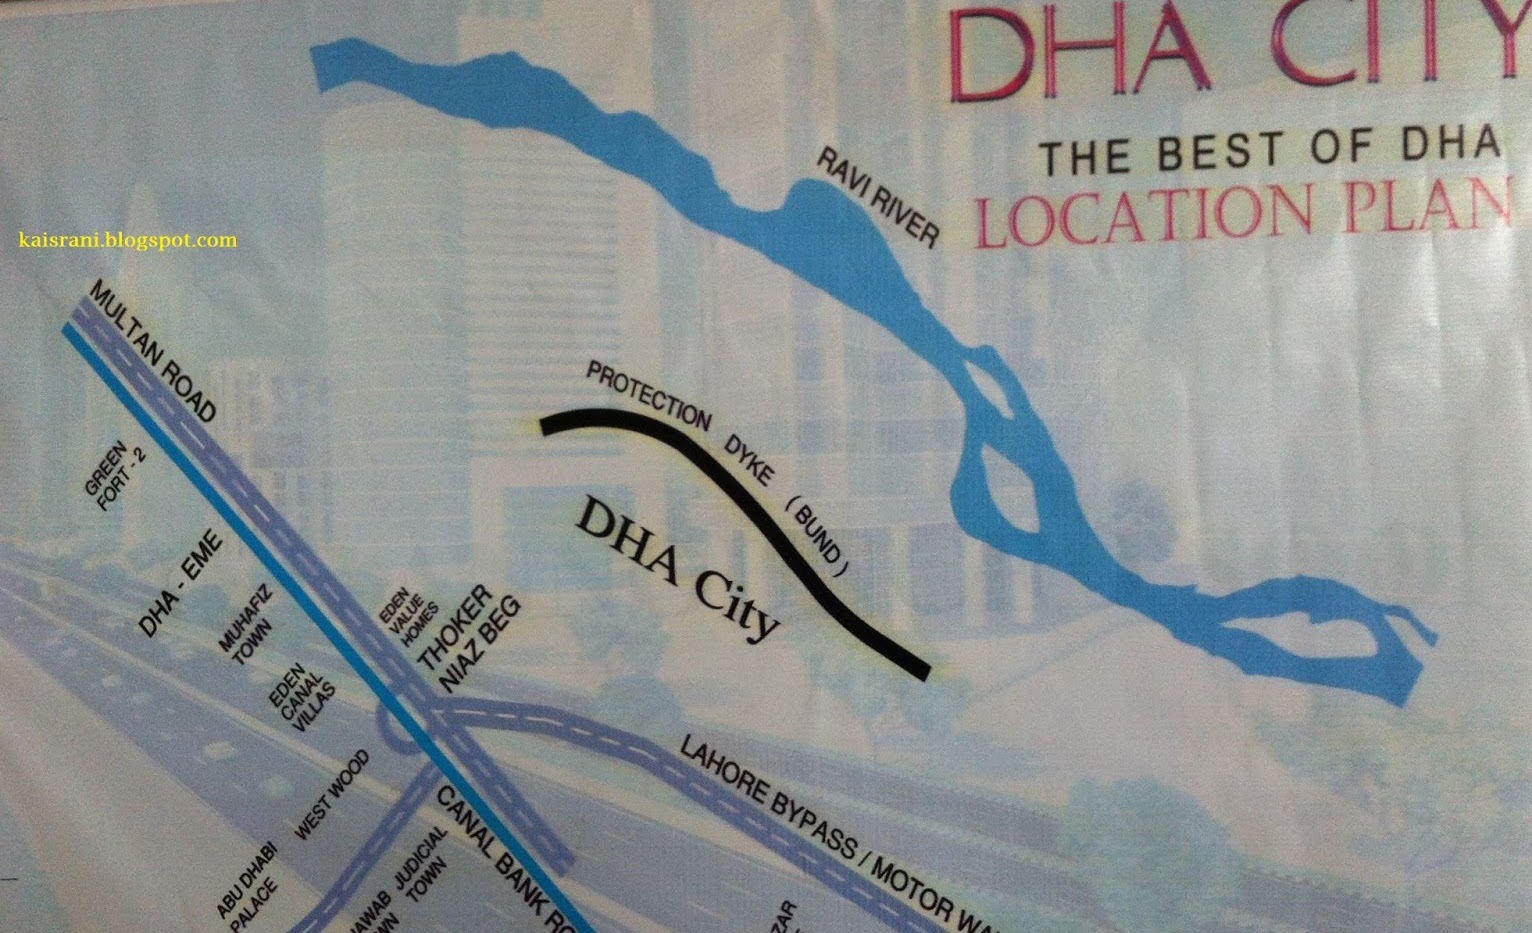 DHA city Scam